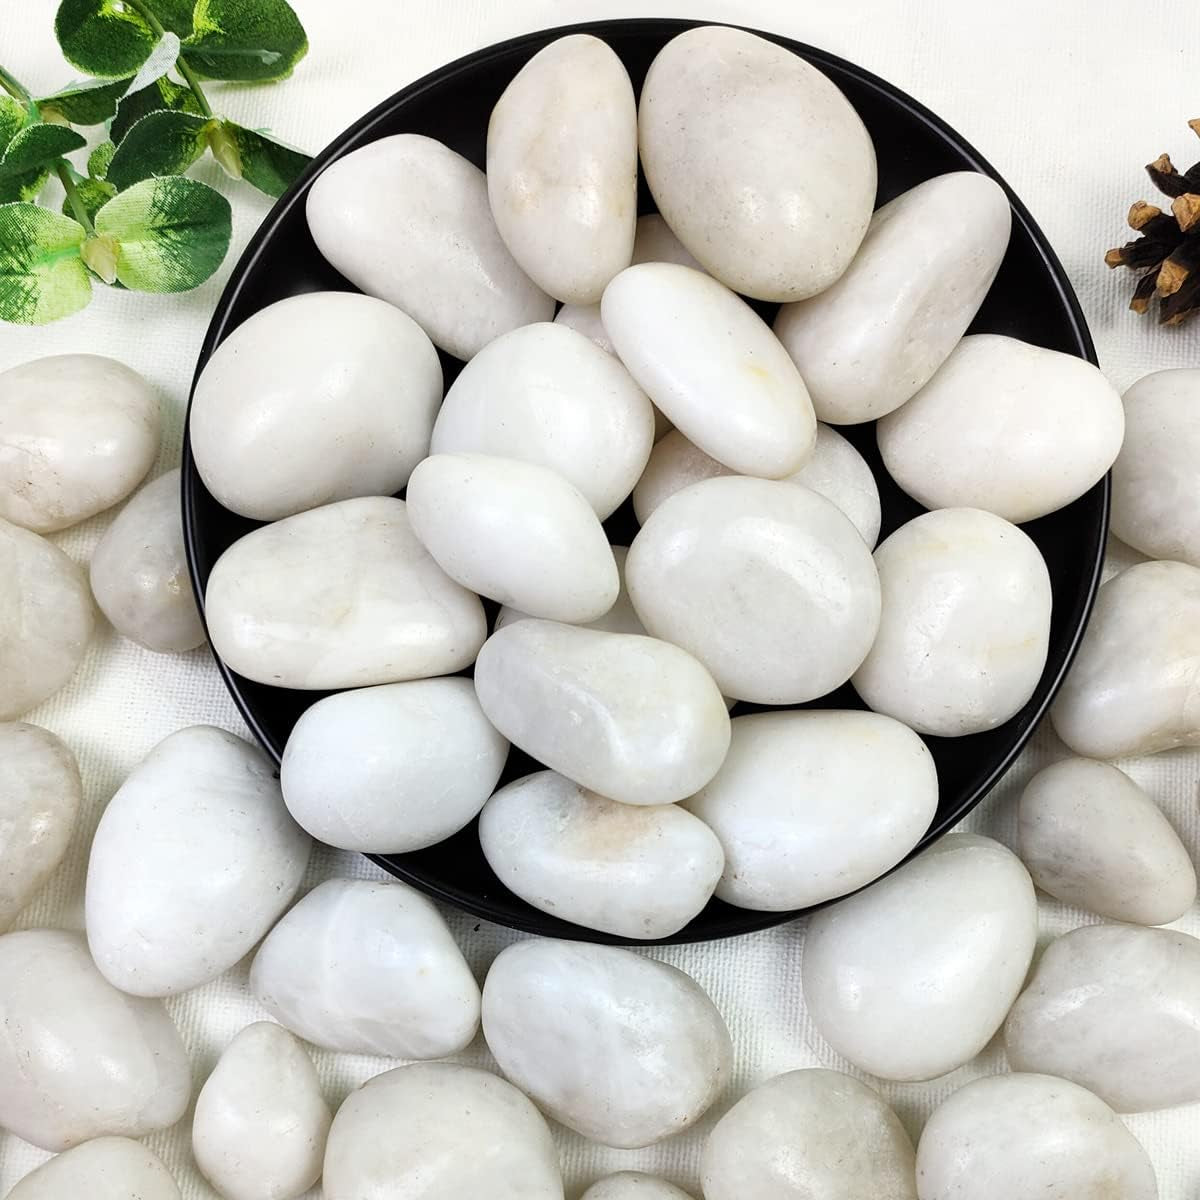 5Lbs White River Rocks, 1-2 Inch Natural Pebbles for Indoor Plants, High Polished Decorative Stones Vase Filler Fish Tank Aquariums Landscaping Garden Outdoor and Indoor DIY